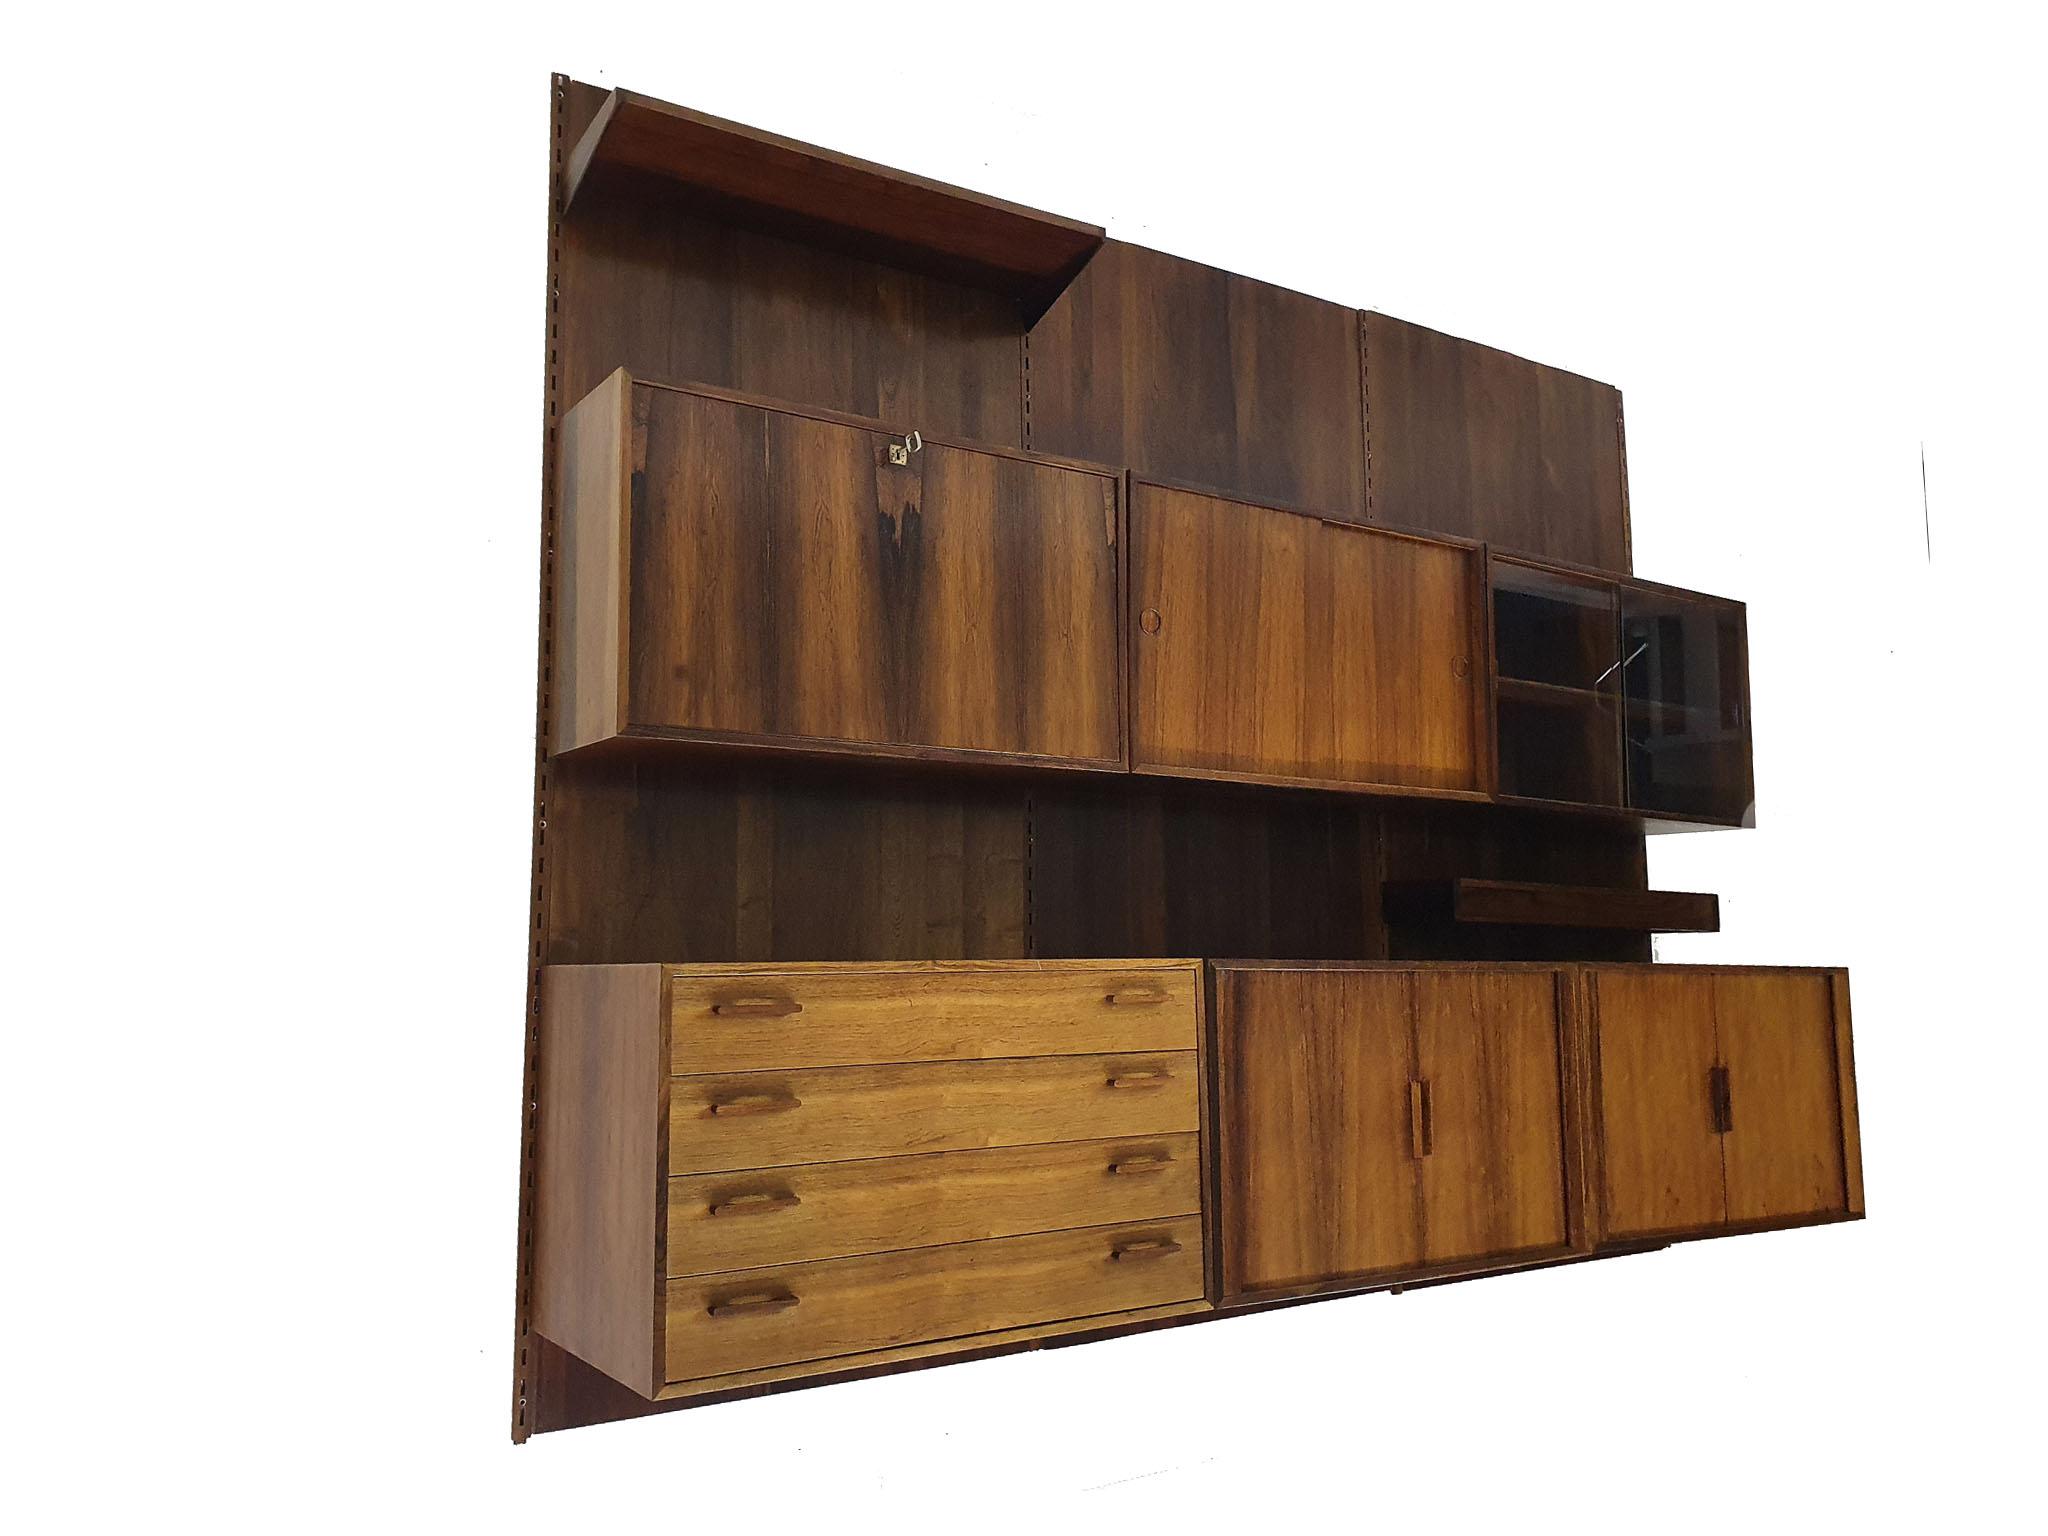 Large rosewood wall unit with rosewood back plates.
The cabinet has some traces of use like stains, but no veneer damage.
There are 2 holes in the back plates, one for the lamp and a larger one which is damaged, but not visisble when the cabinet